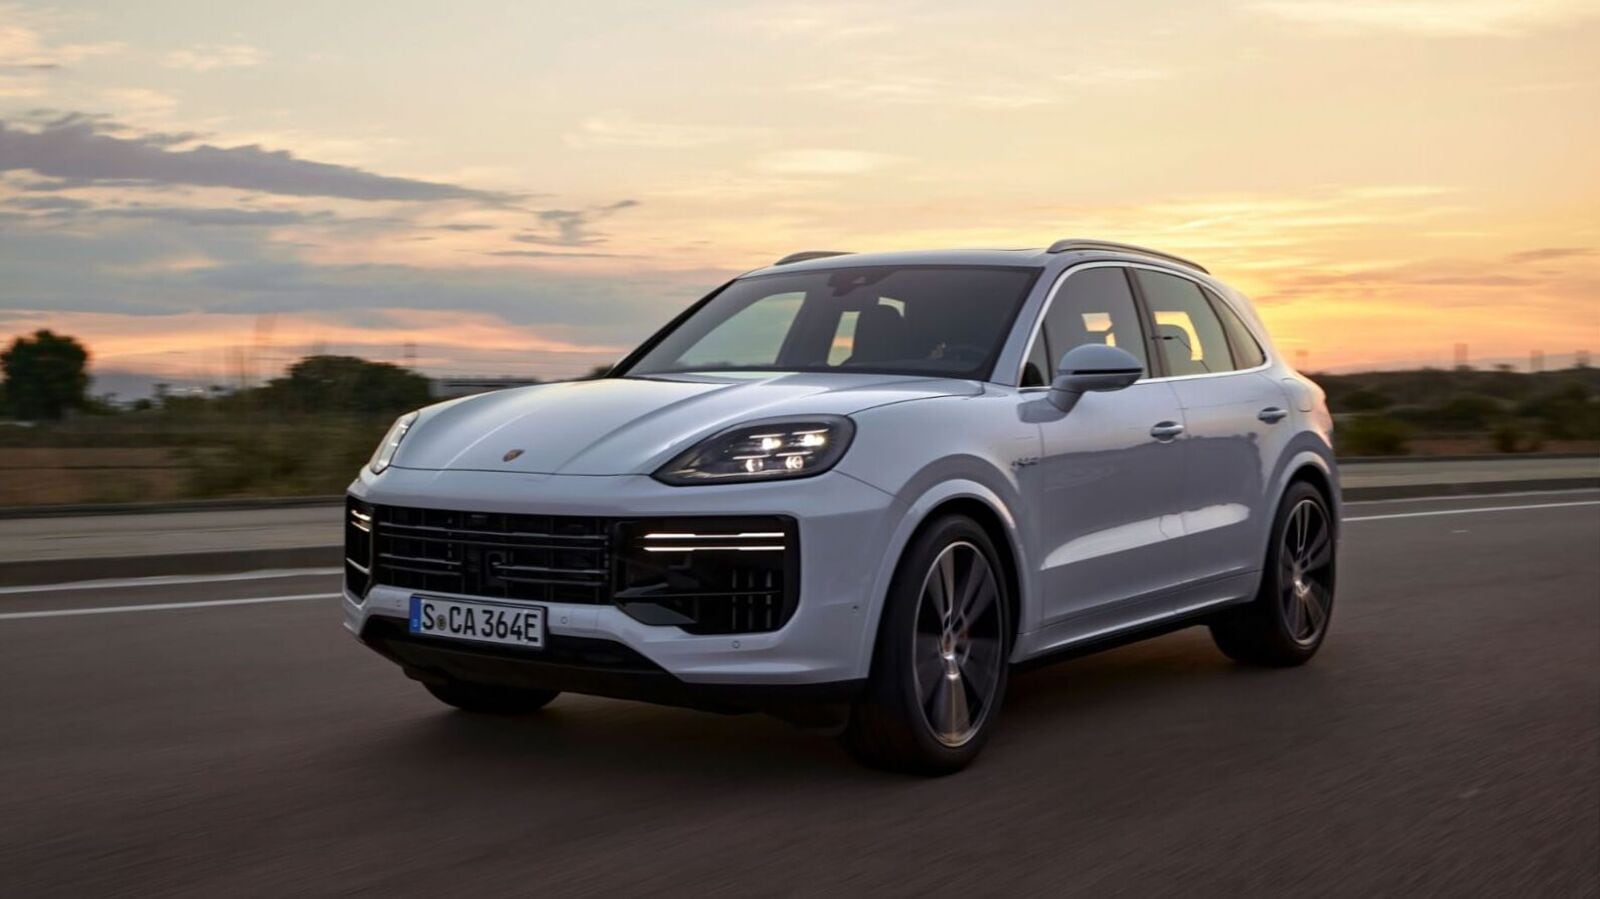 Porsche debuts the most powerful Cayenne SUV ever